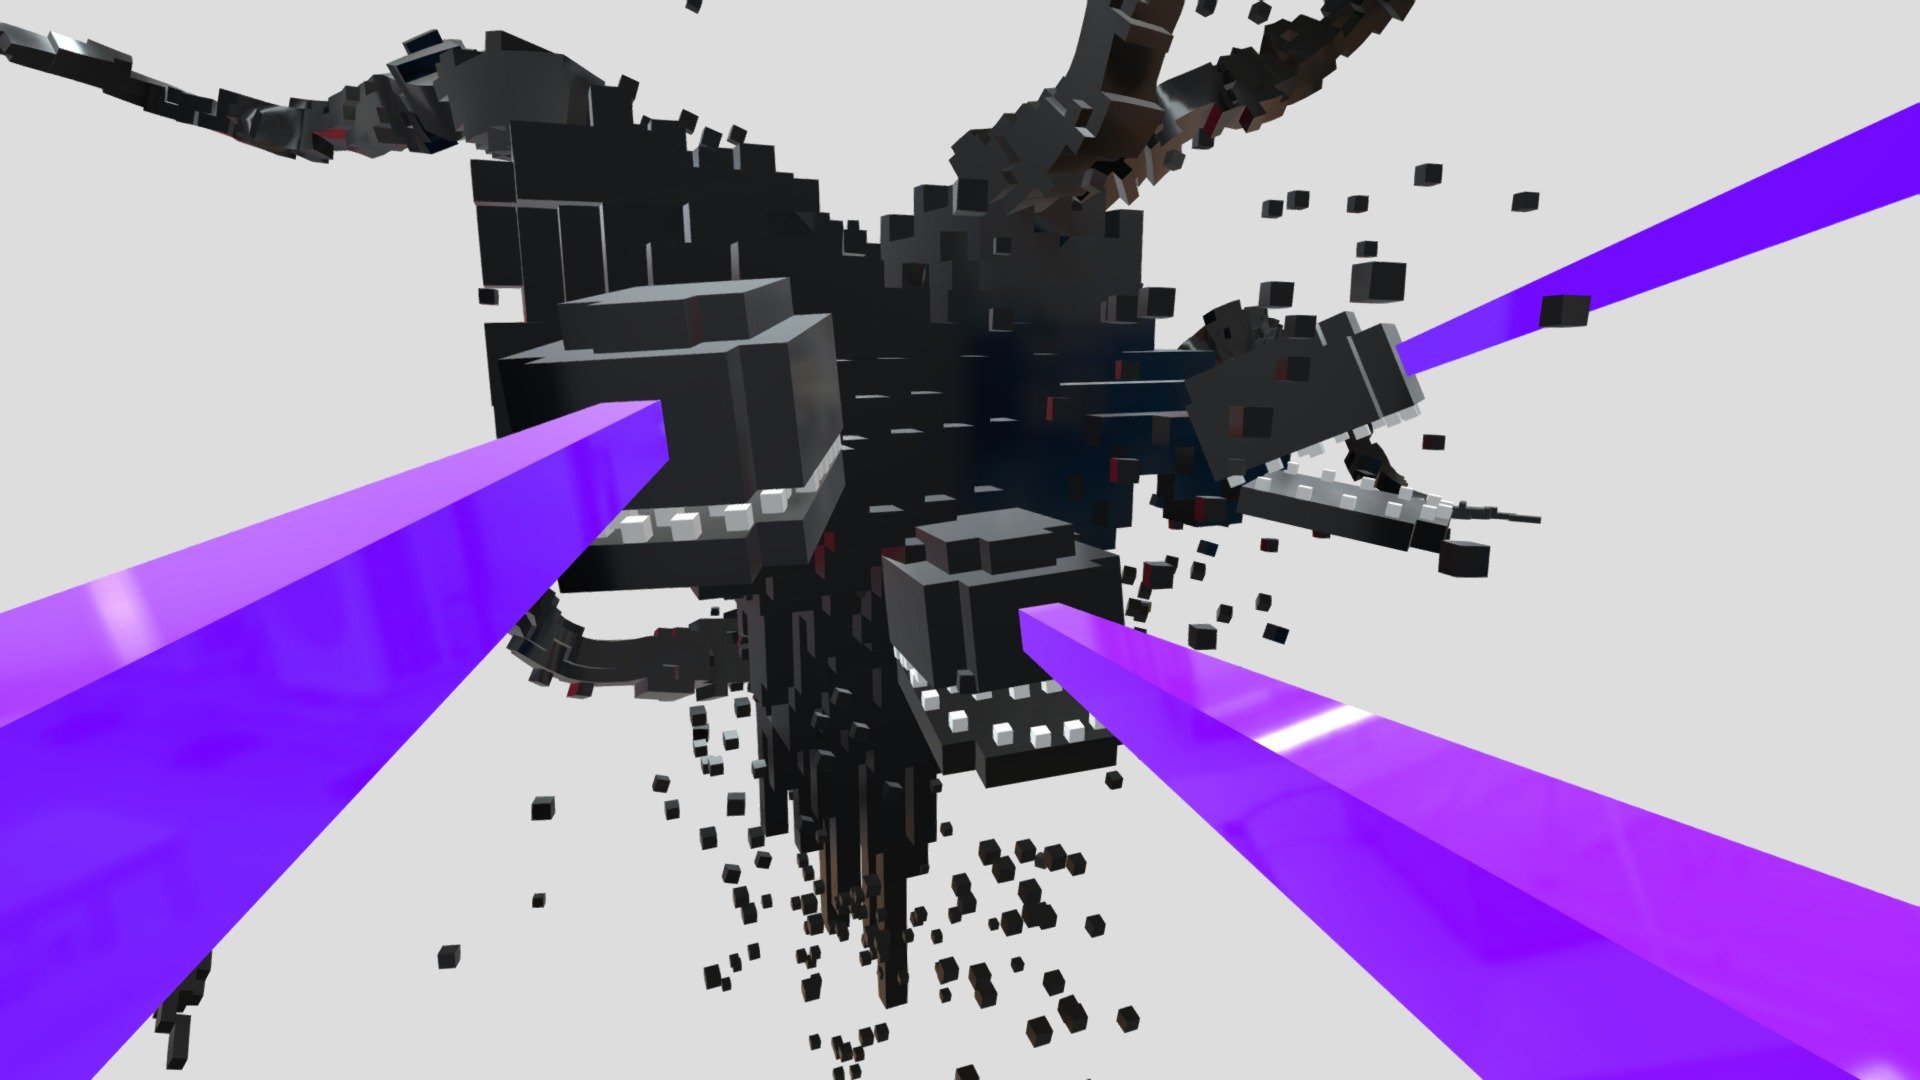 Storm, wither destroyer #2